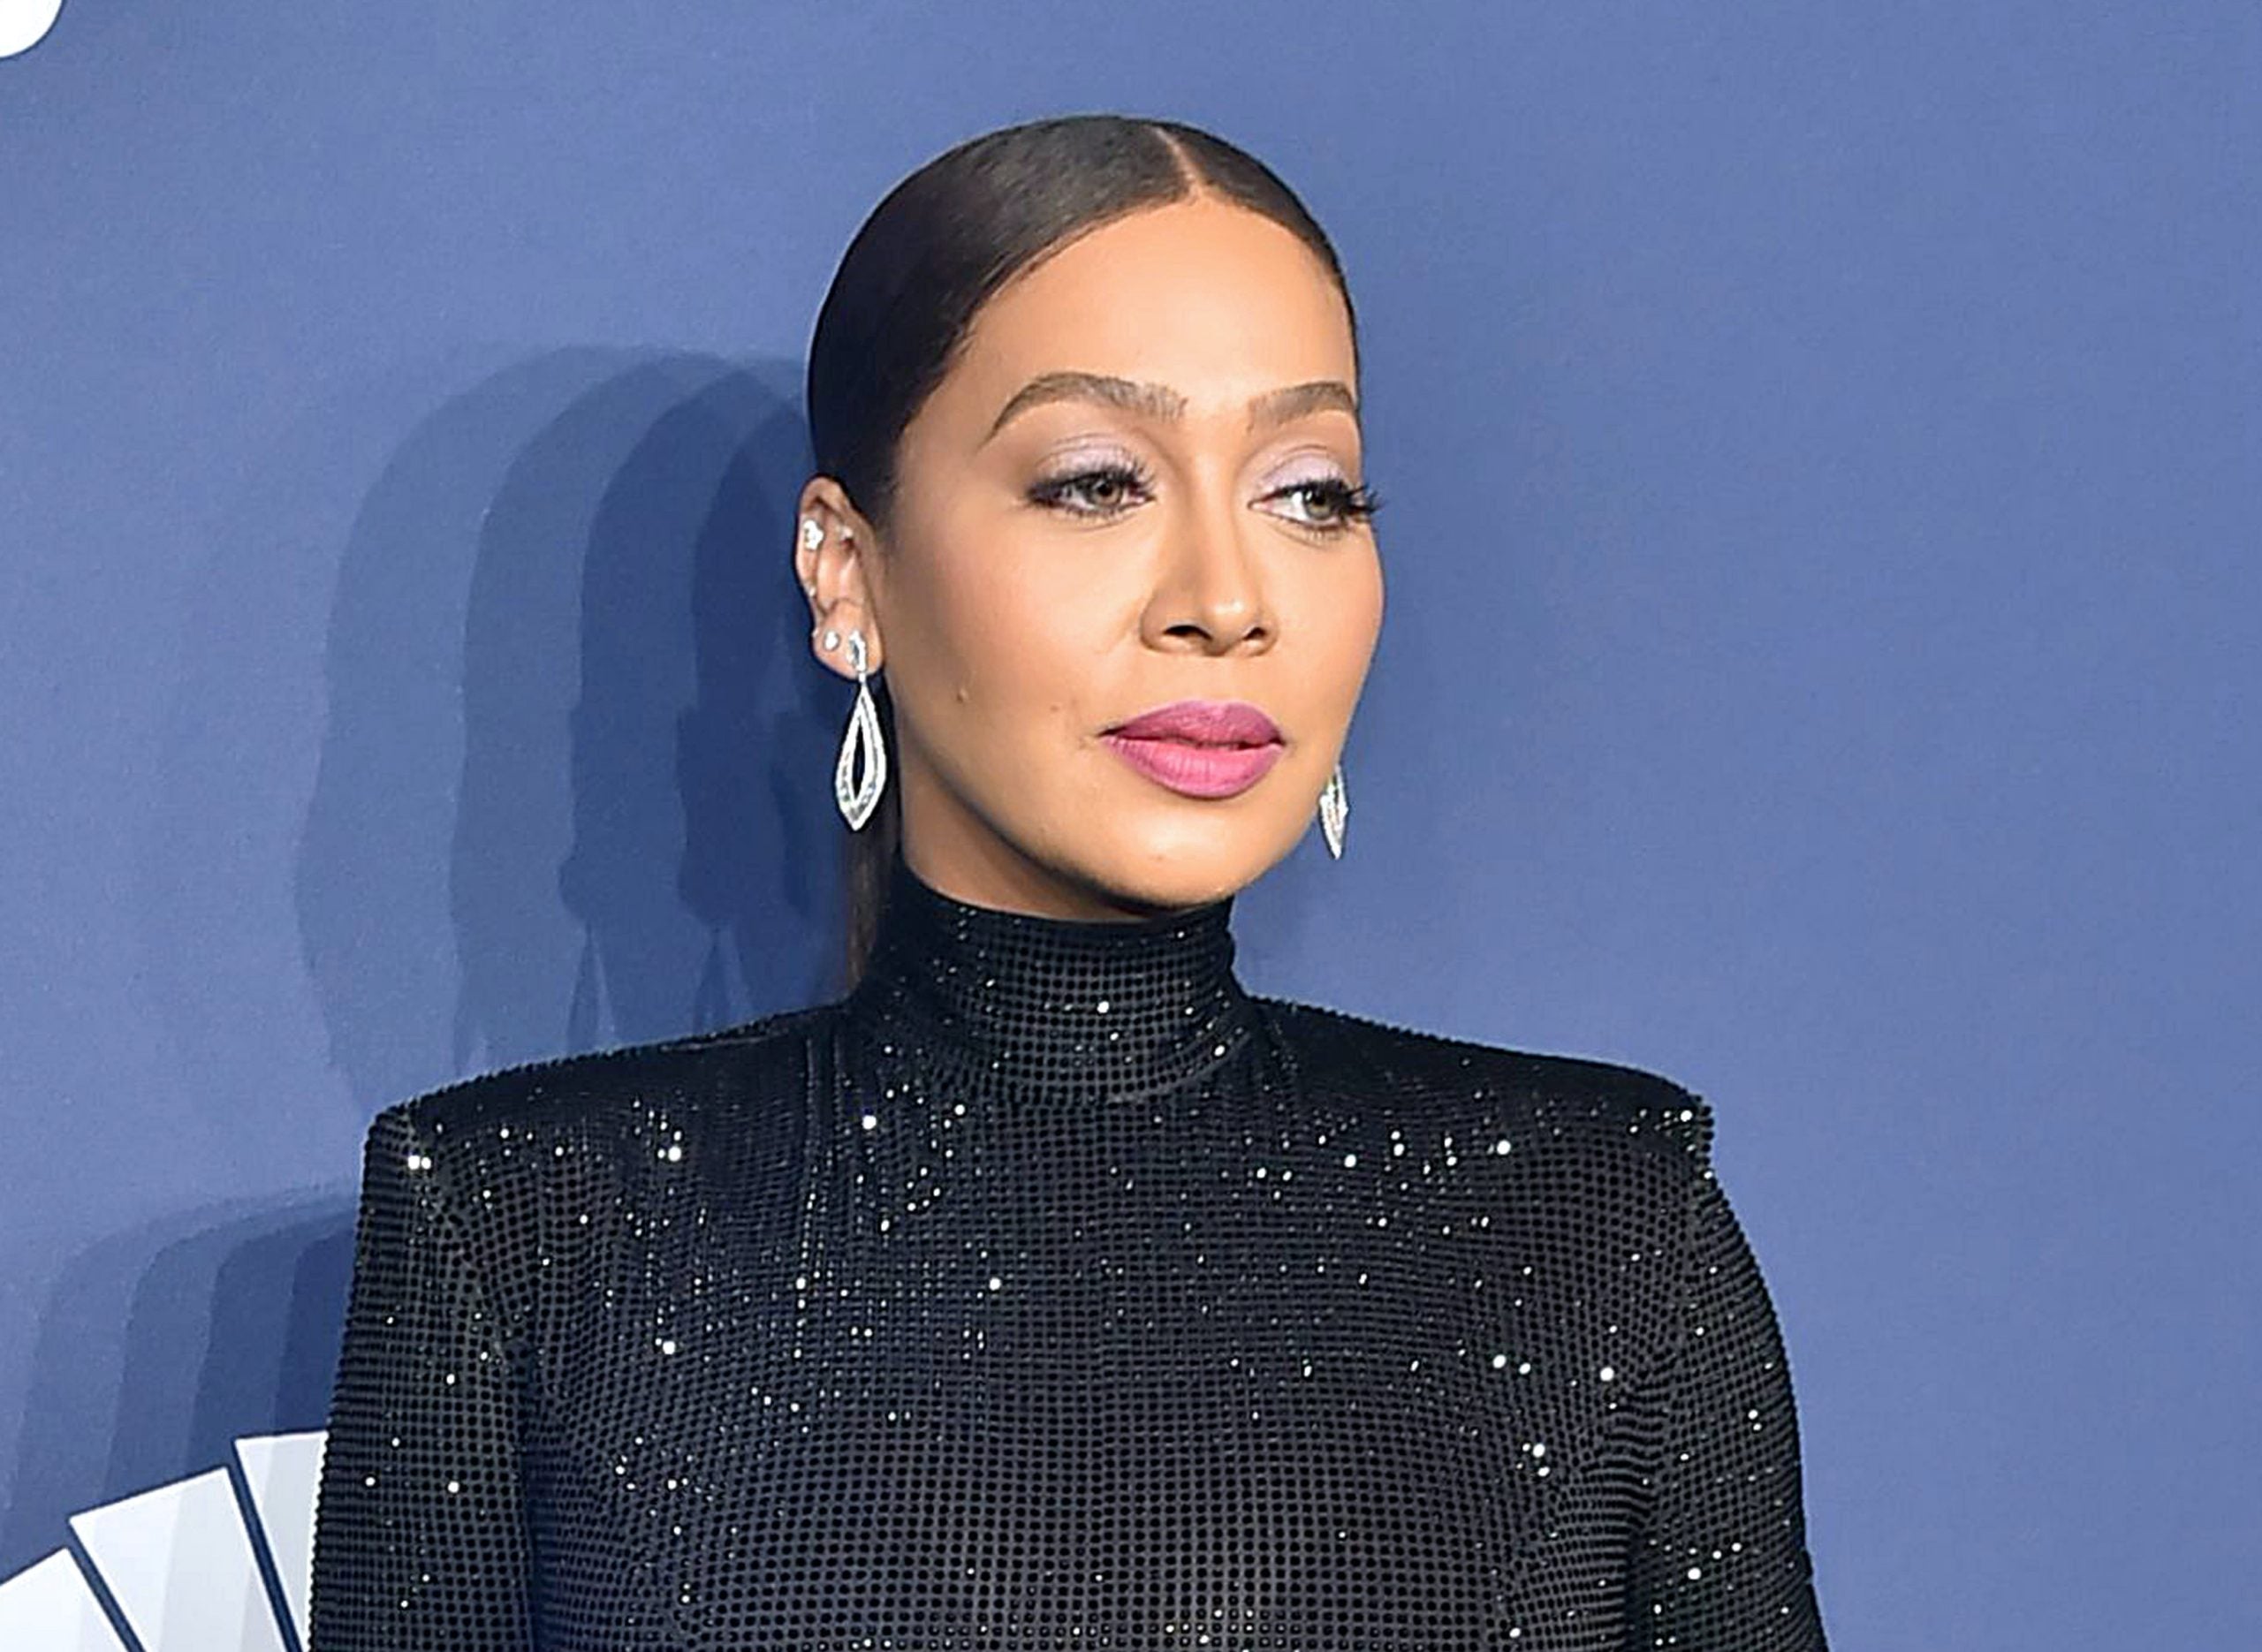 Lala Anthony on Joining the cast of “Wu-Tang: An American Saga” in her First Biographical Role